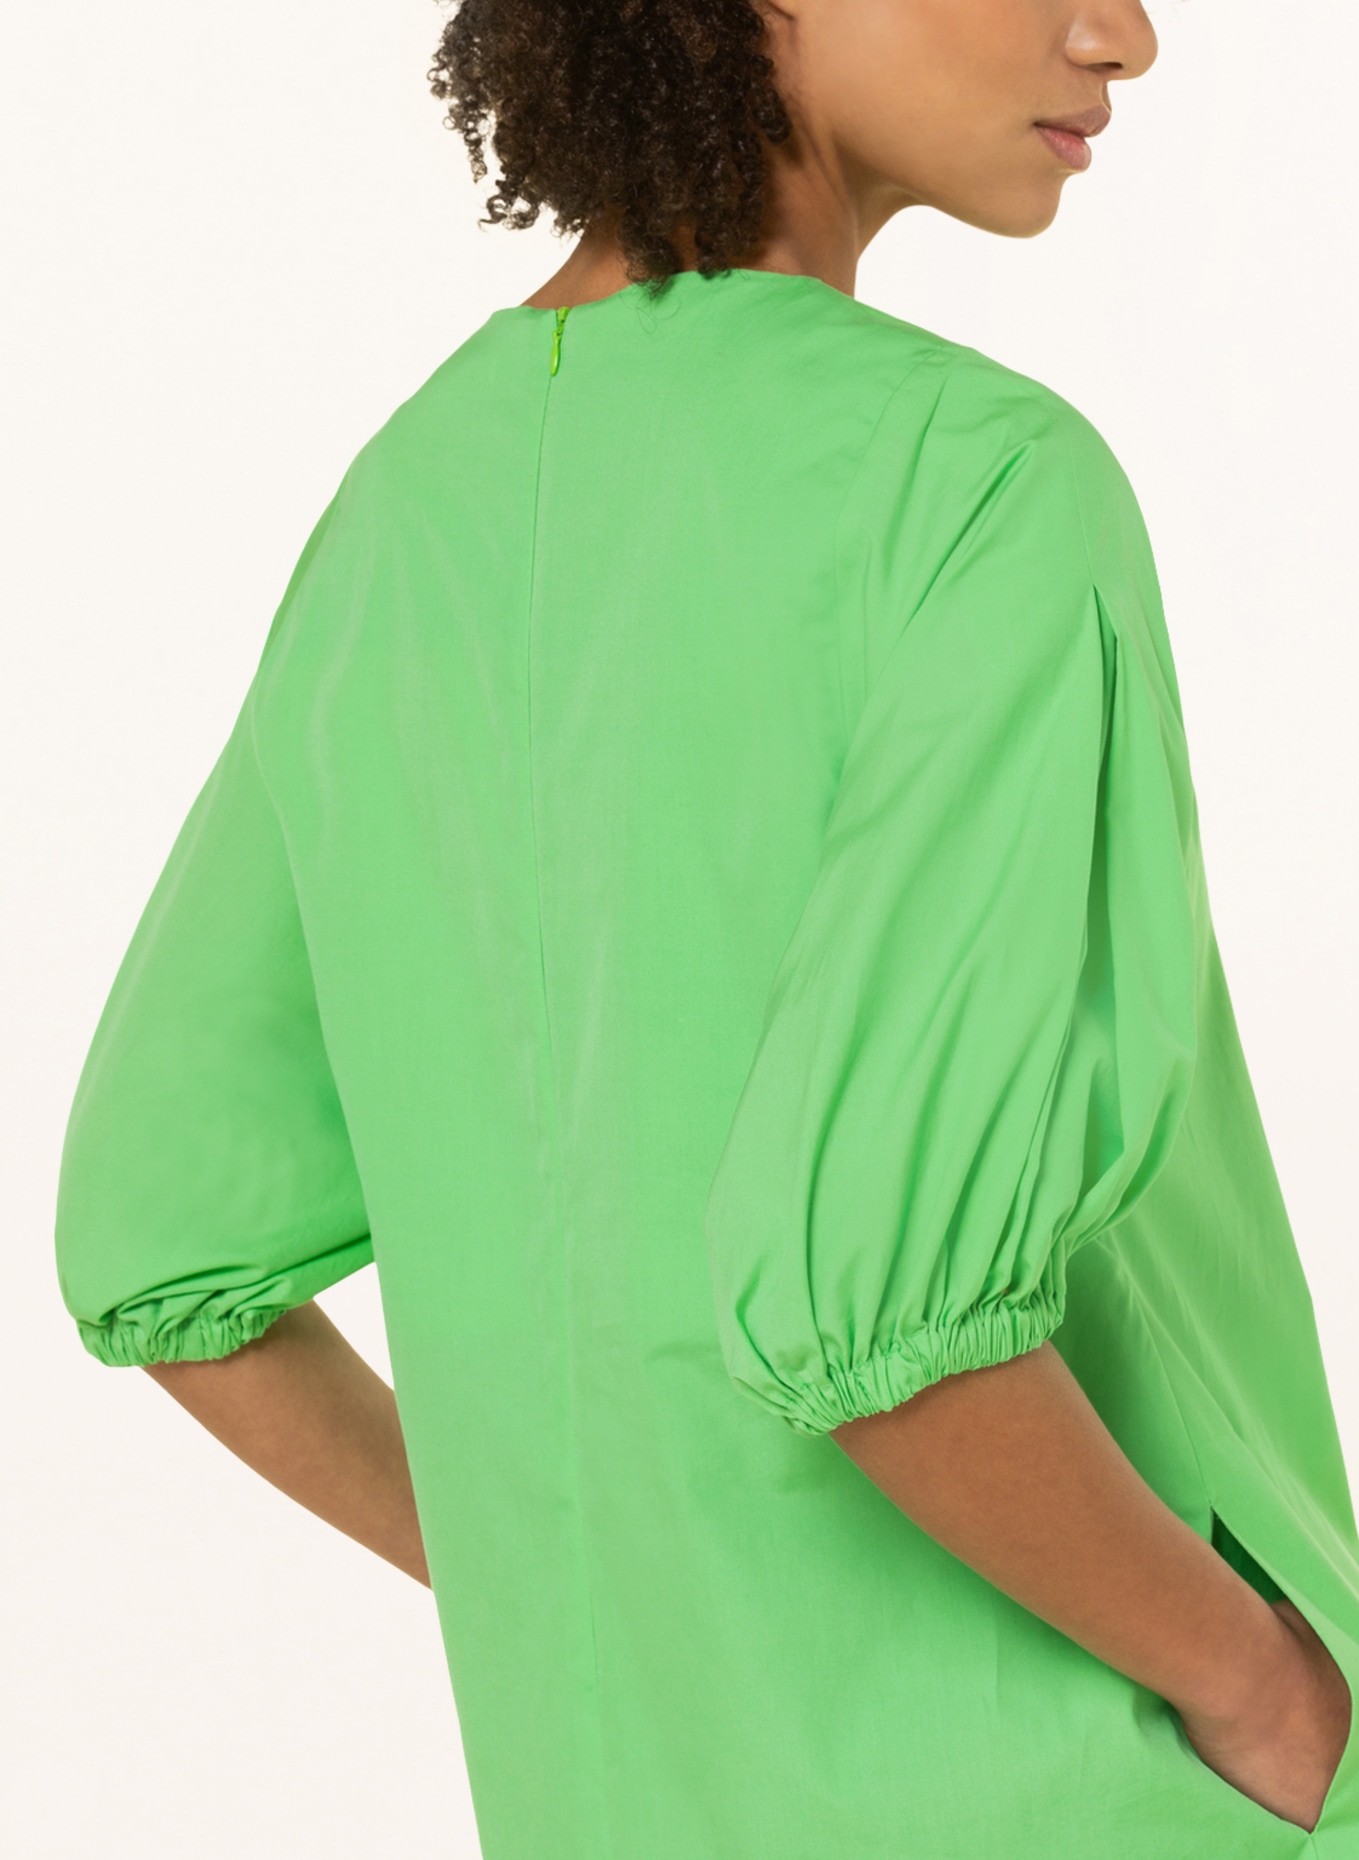 LOUIS and MIA Dress with 3/4 sleeves, Color: LIGHT GREEN (Image 4)